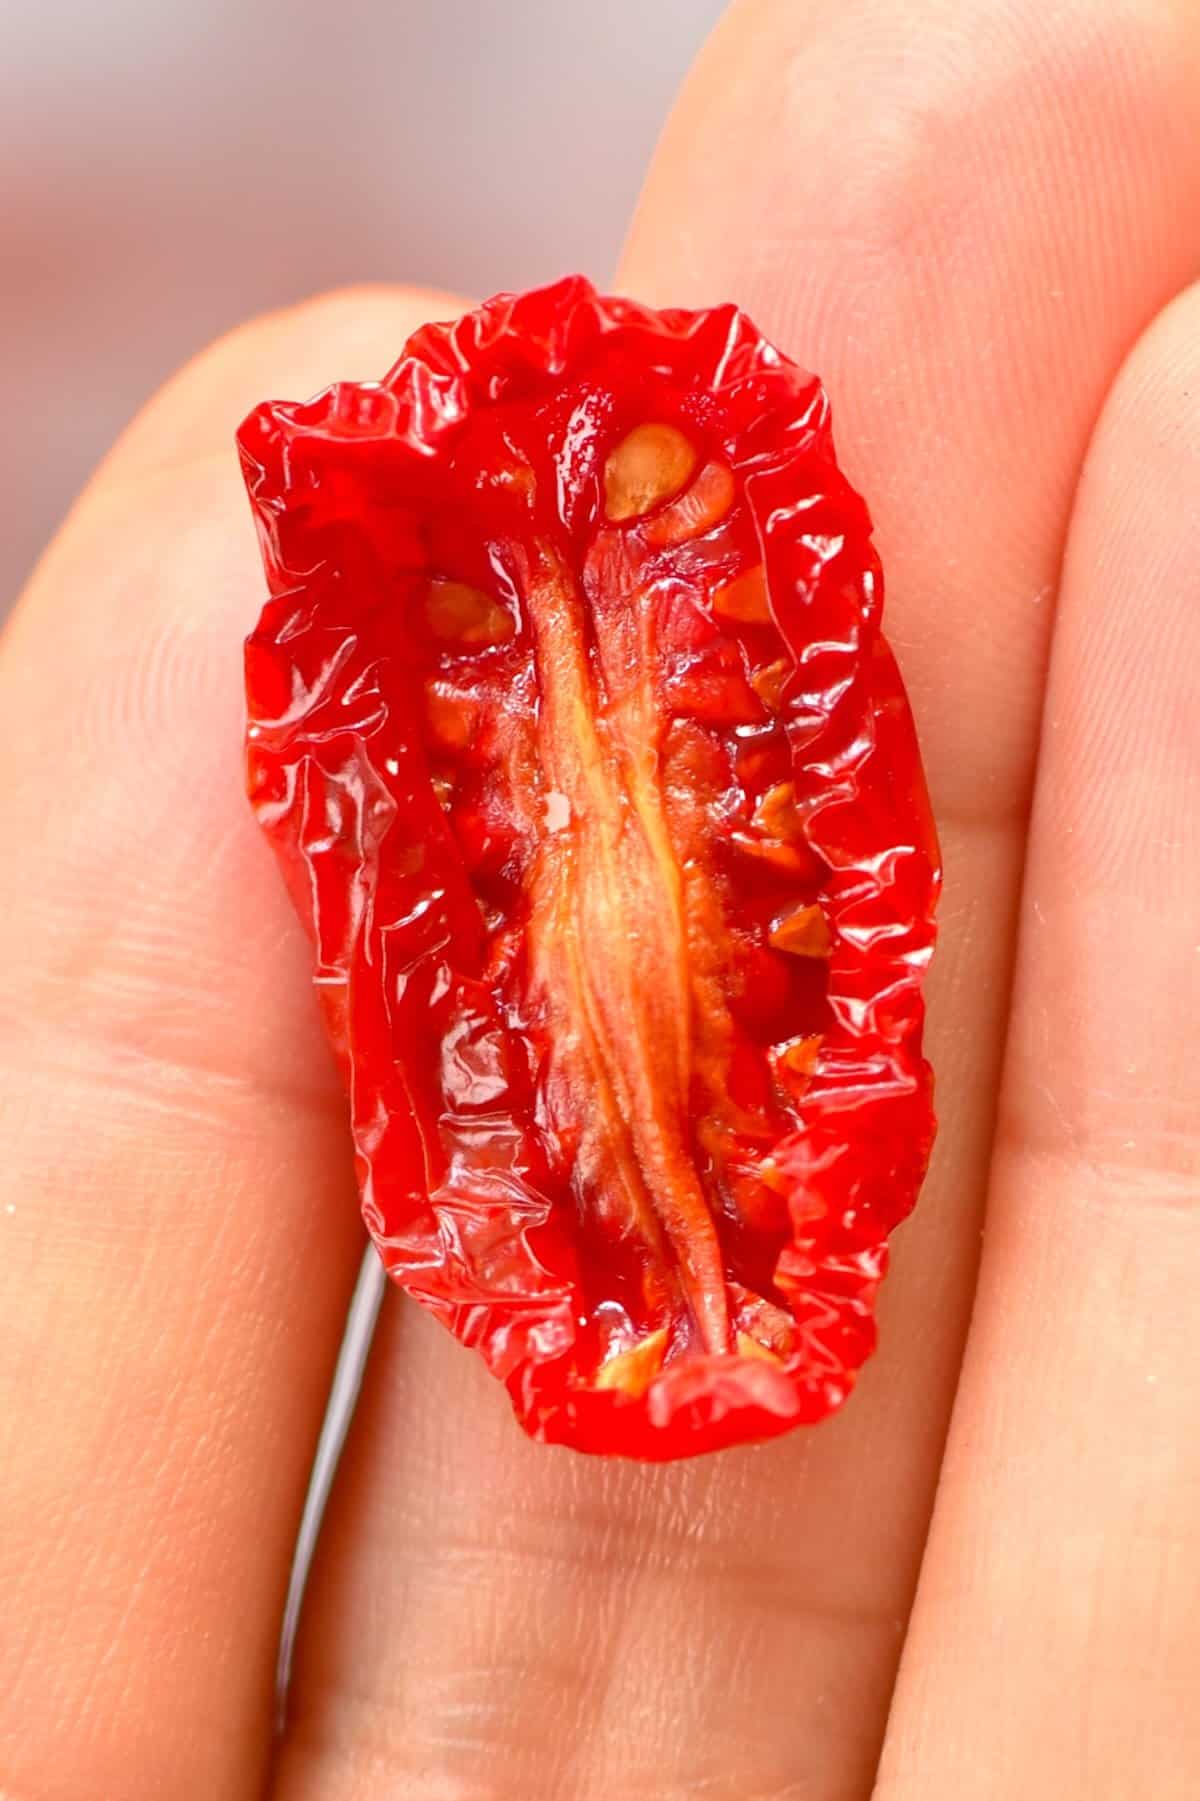 Hand holding one small dried tomato